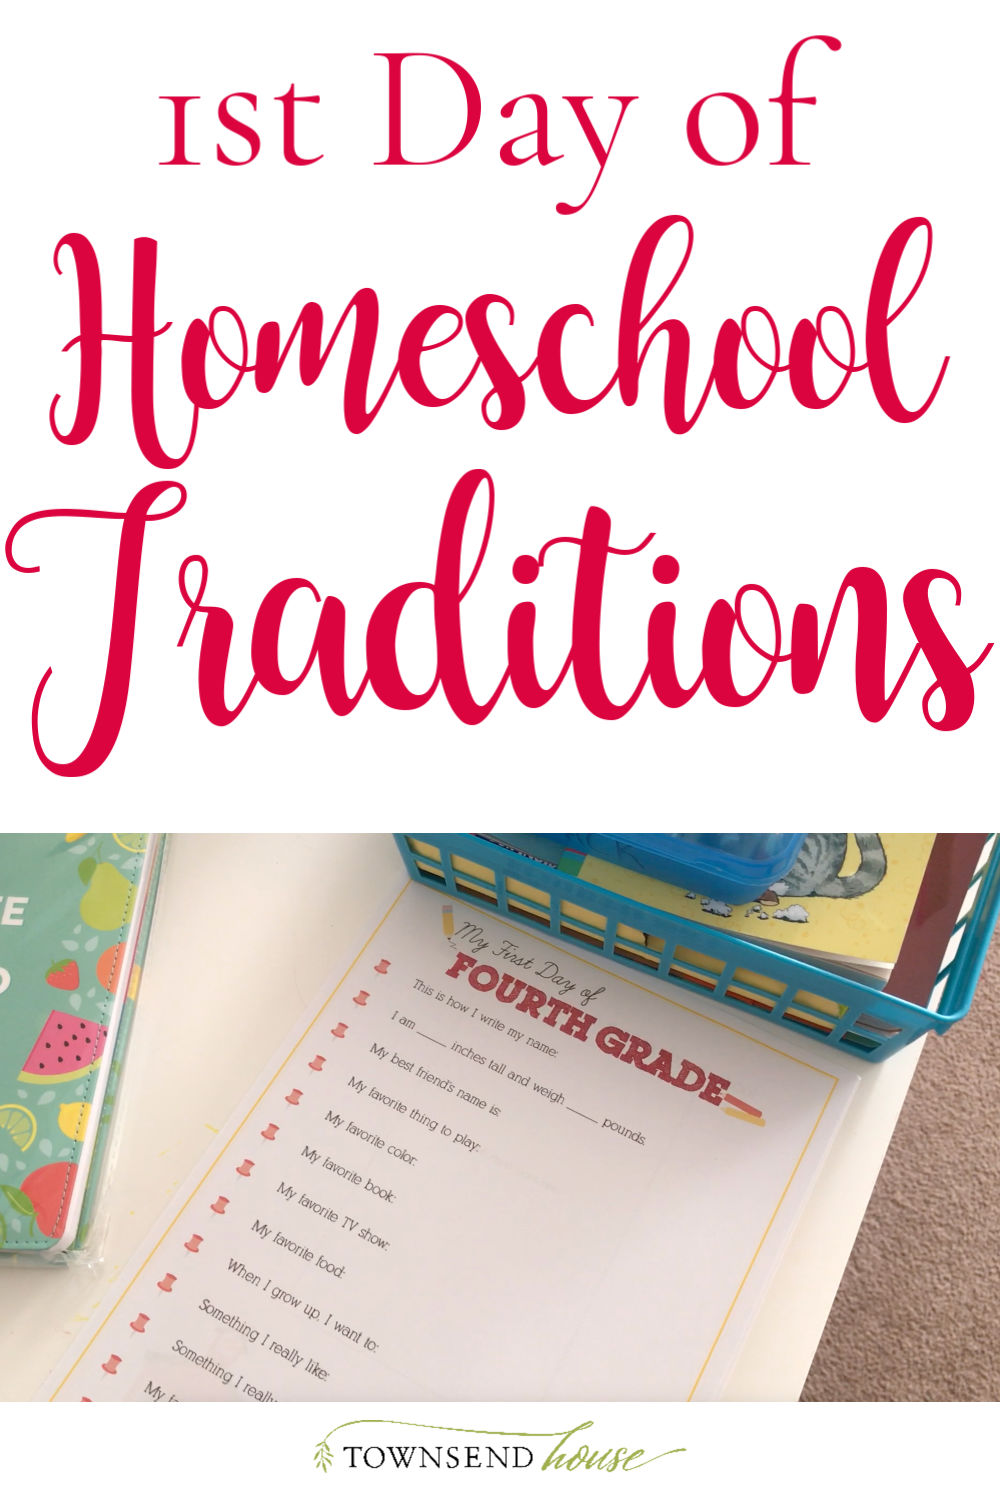 Homeschool Traditions for a Great 1st Day!